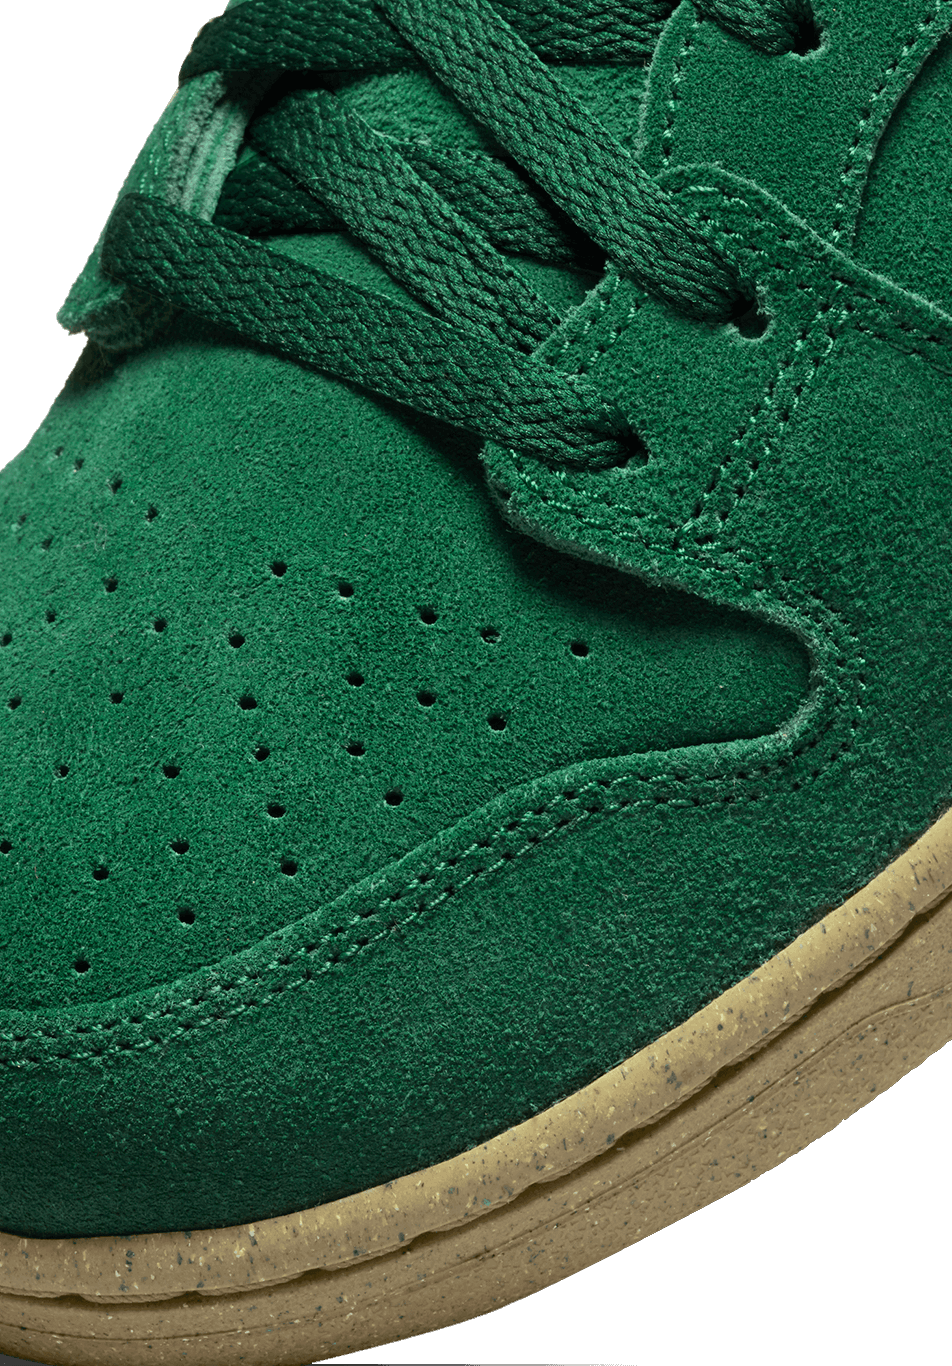 Nike SB Dunk High Pro Decon Gorge Green ONLINE ONLY